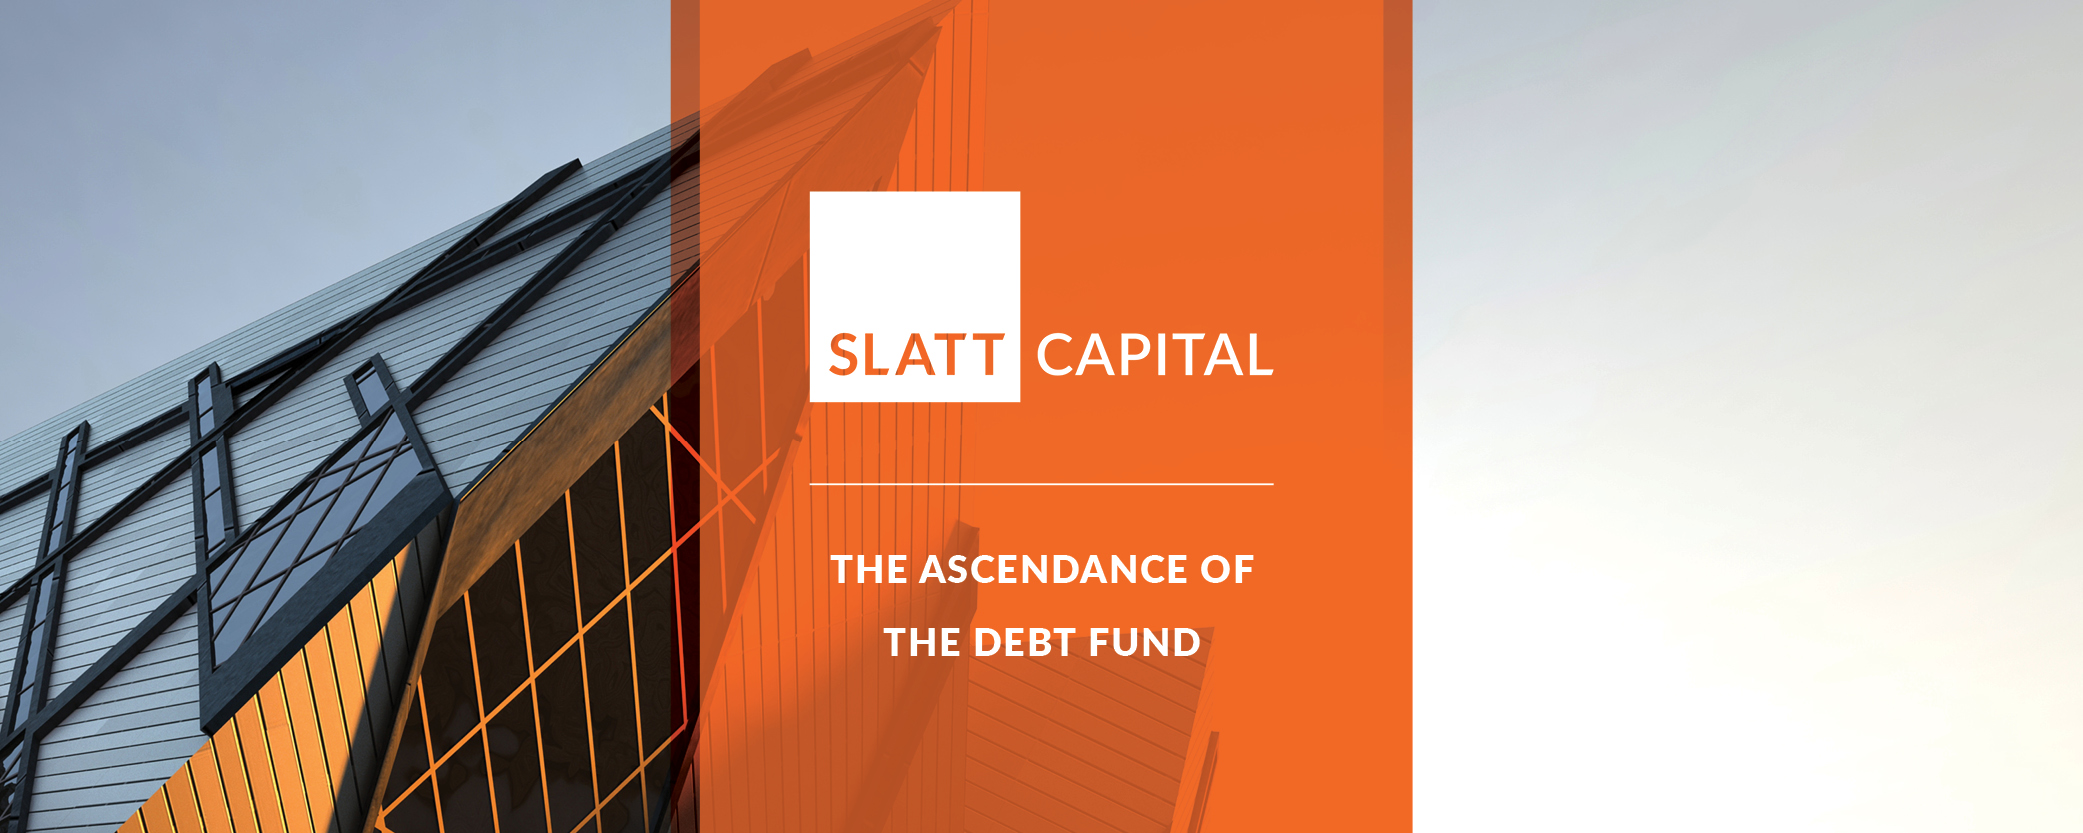 The ascendance of the debt fund